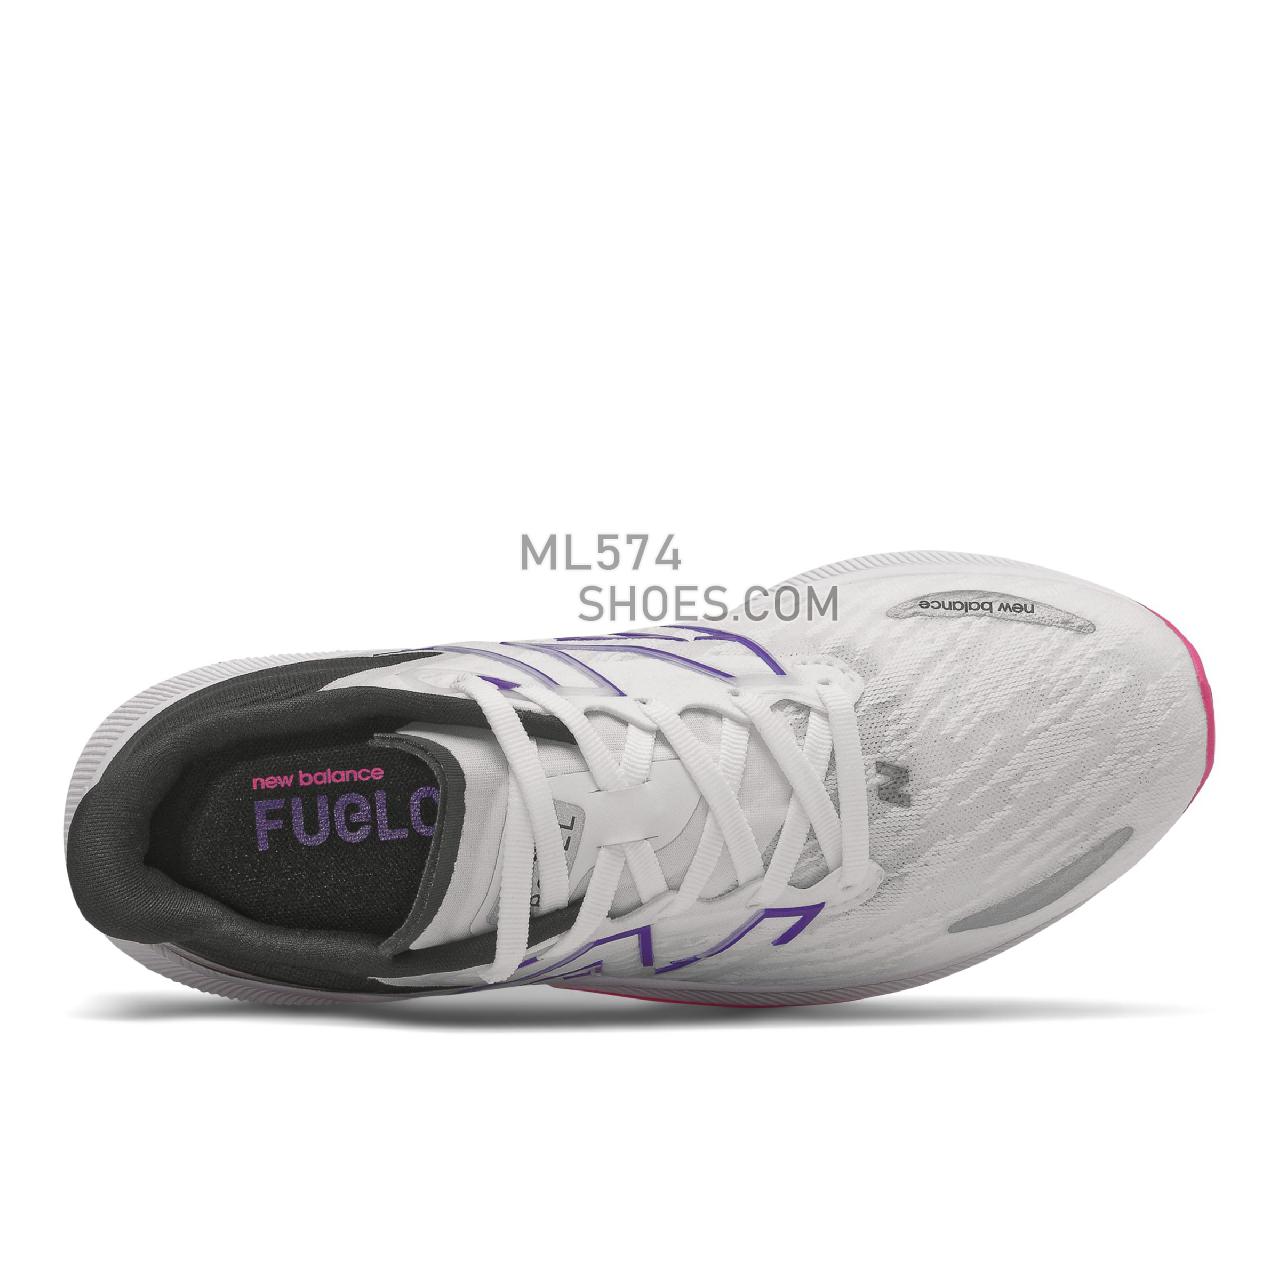 New Balance FuelCell Propel v3 - Women's Neutral Running - White with Pink Glo and Deep Violet - WFCPRLM3